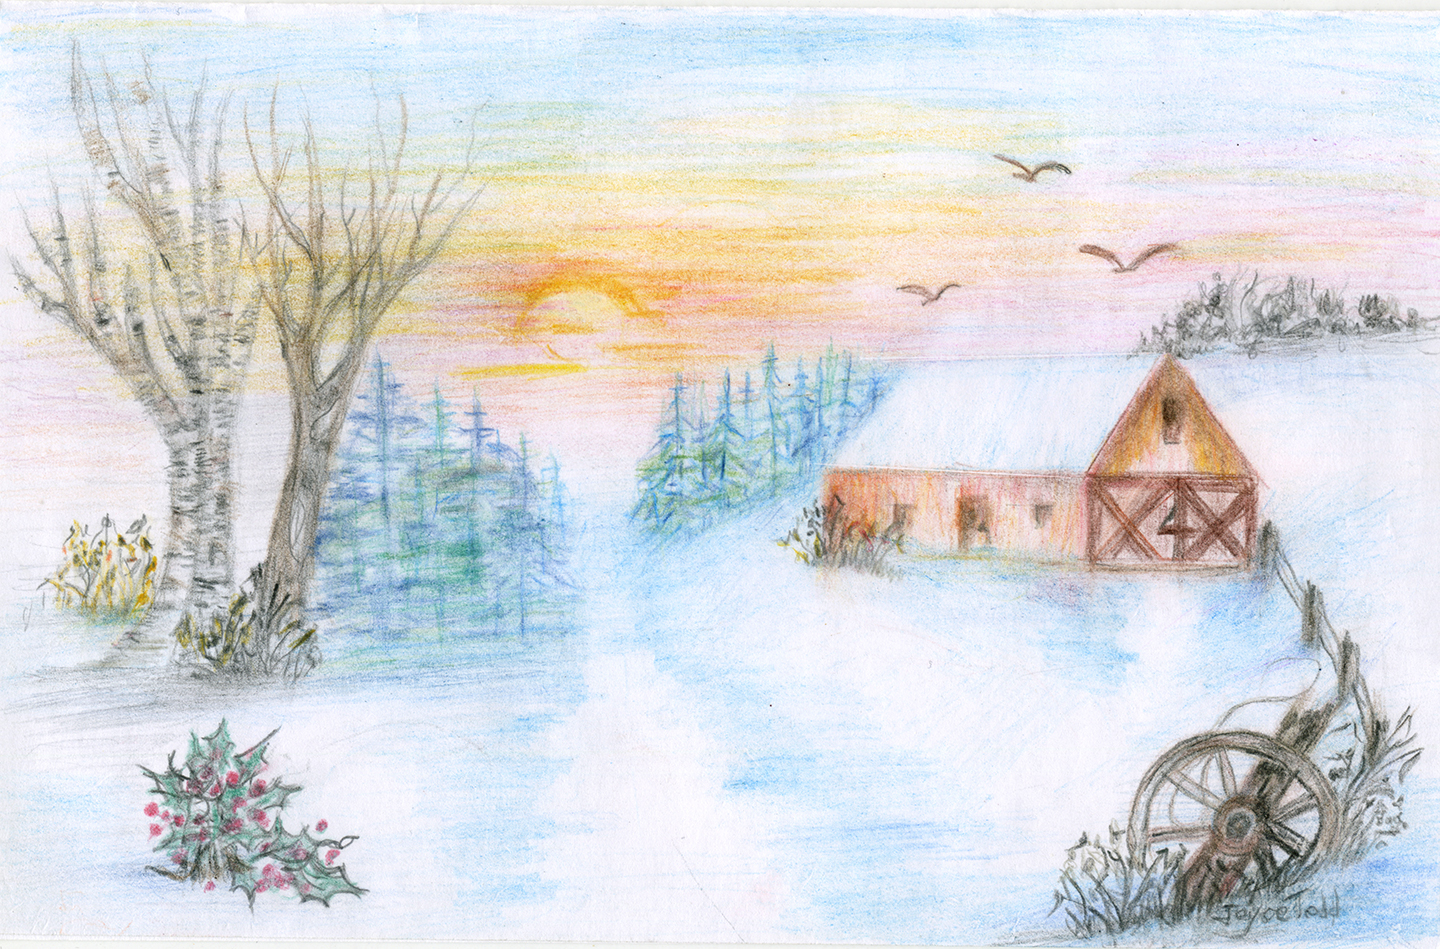 Artwork created by Joyce Todd of New Perspective Senior Living, Silvis, Ill. will be used in Christmas cards for the company's 21 residences located throughout the Midwest.